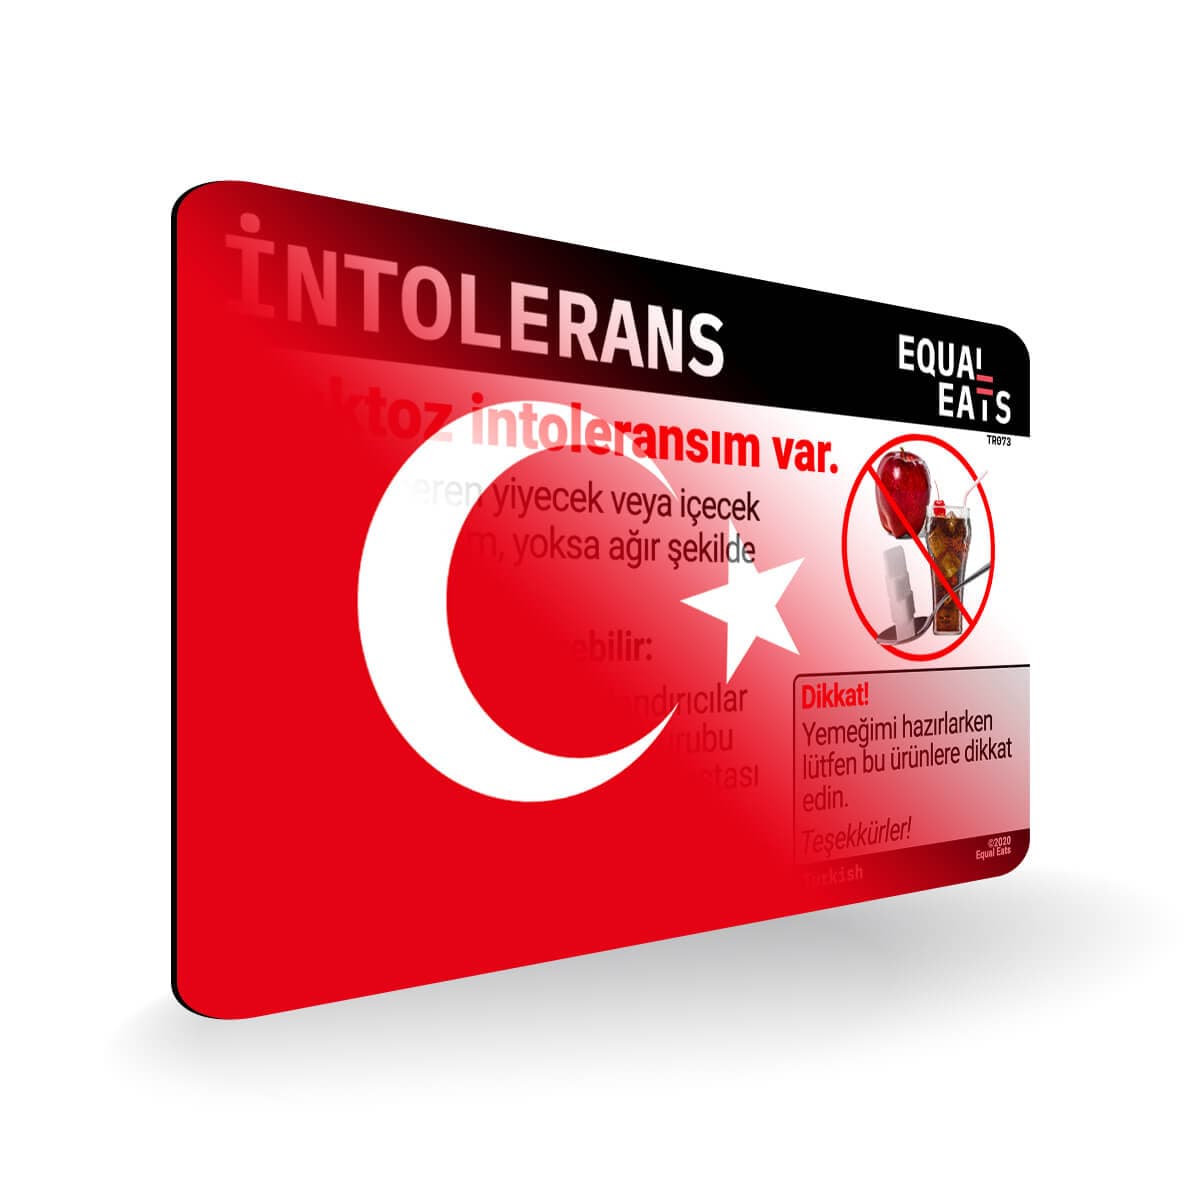 Fructose Intolerance in Turkish. Fructose Intolerant Card for Turkey